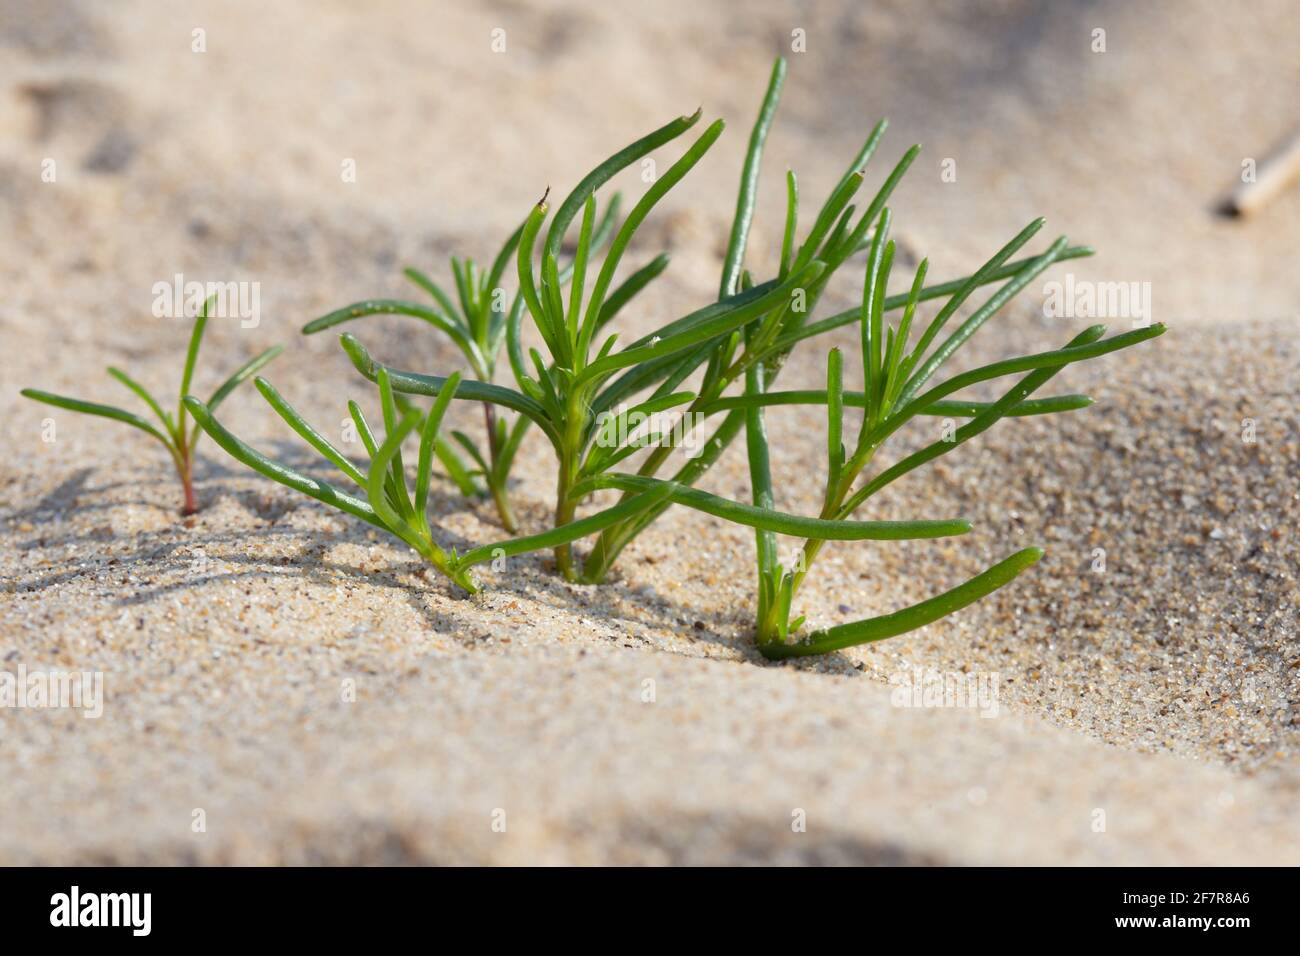 Salicornia wild edible plant that grows in sand on beaches is tasty and healthy food. Green halophytic plant. Stock Photo